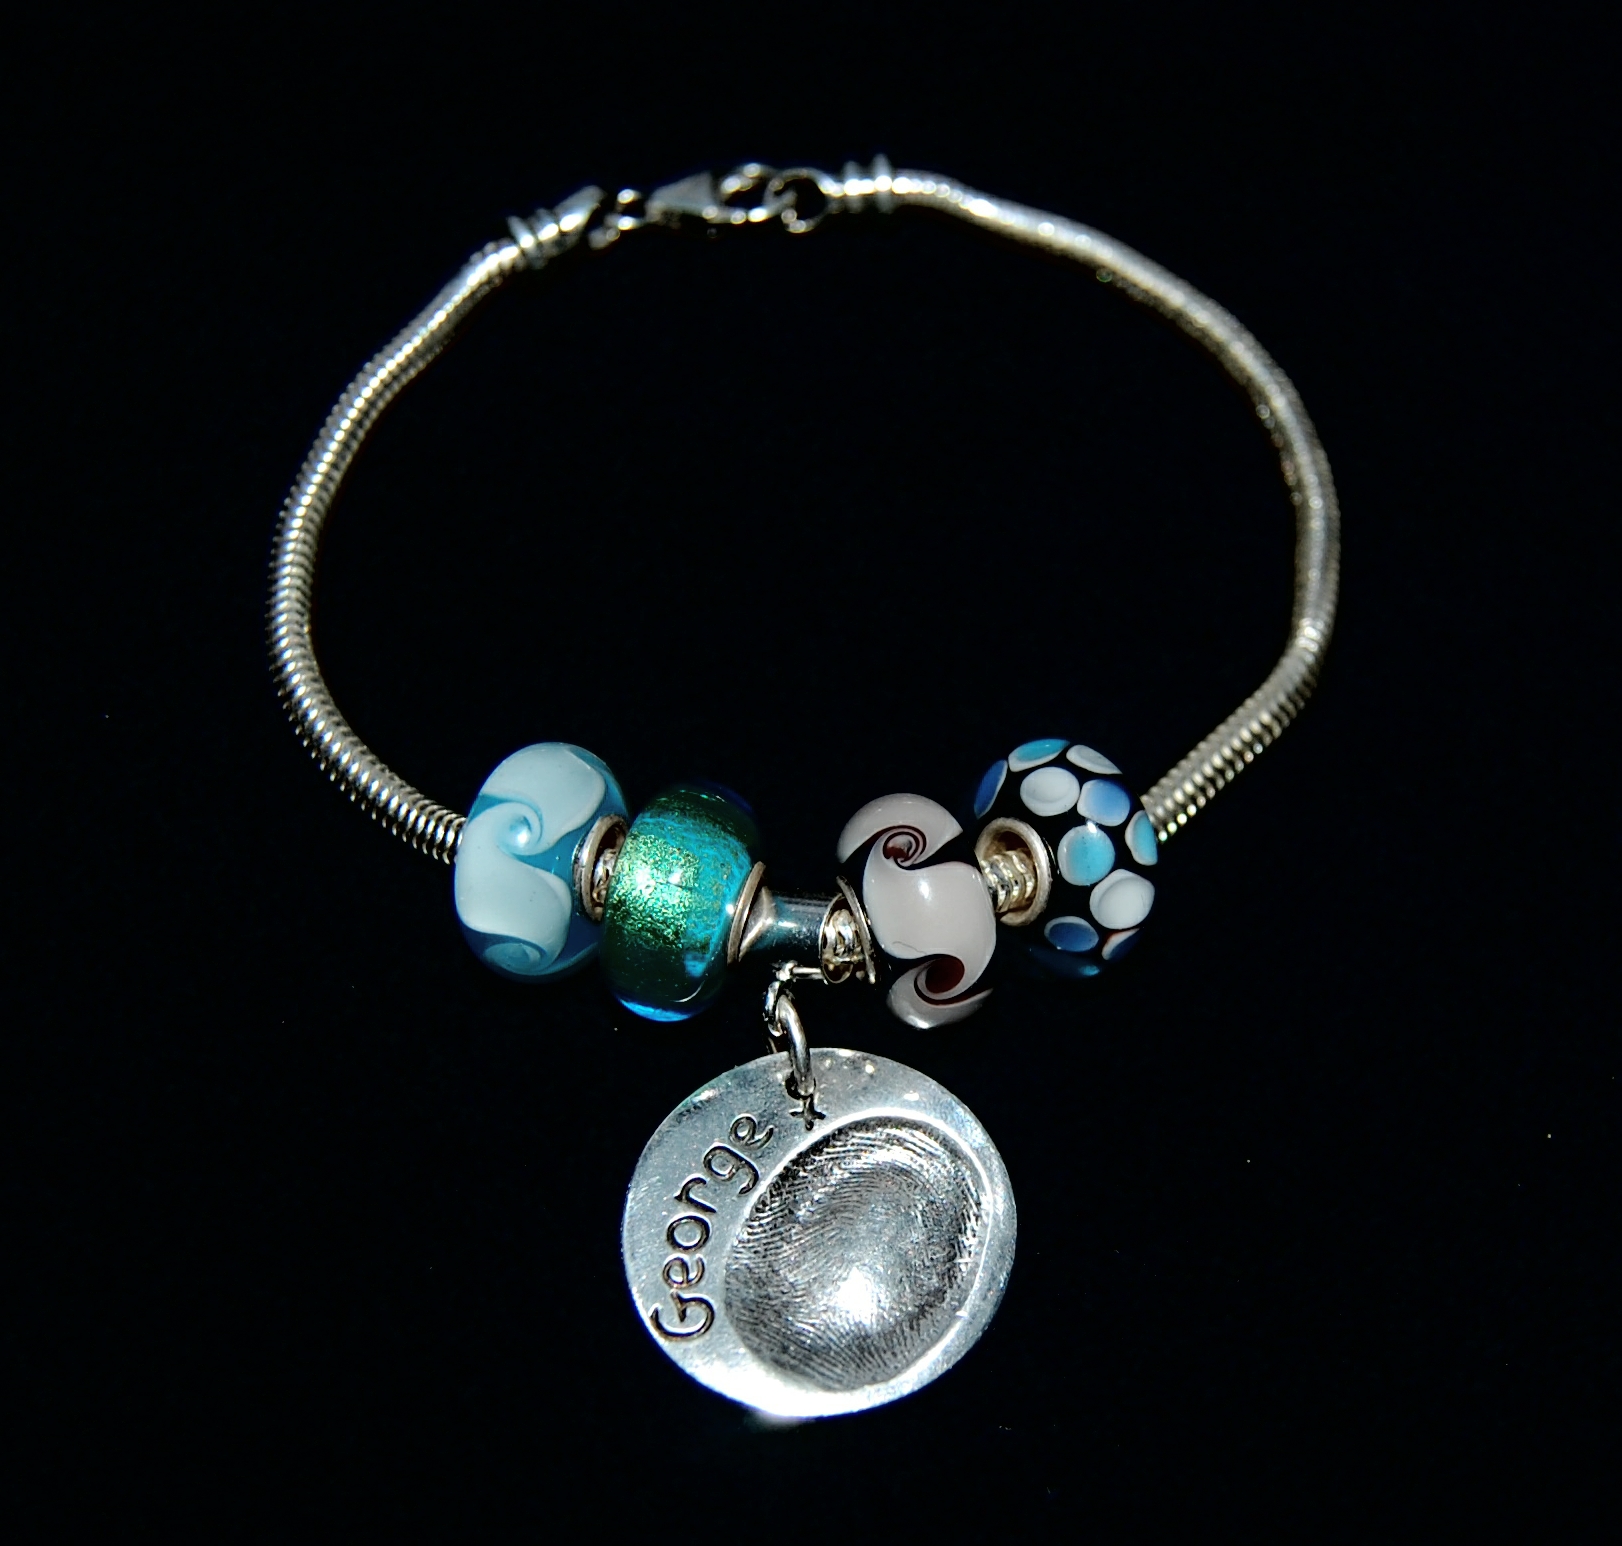 Regular circle shaped silver fingerprint charm presented on a charm carrier. Bracelet can be purchased separately from the Accessories section.